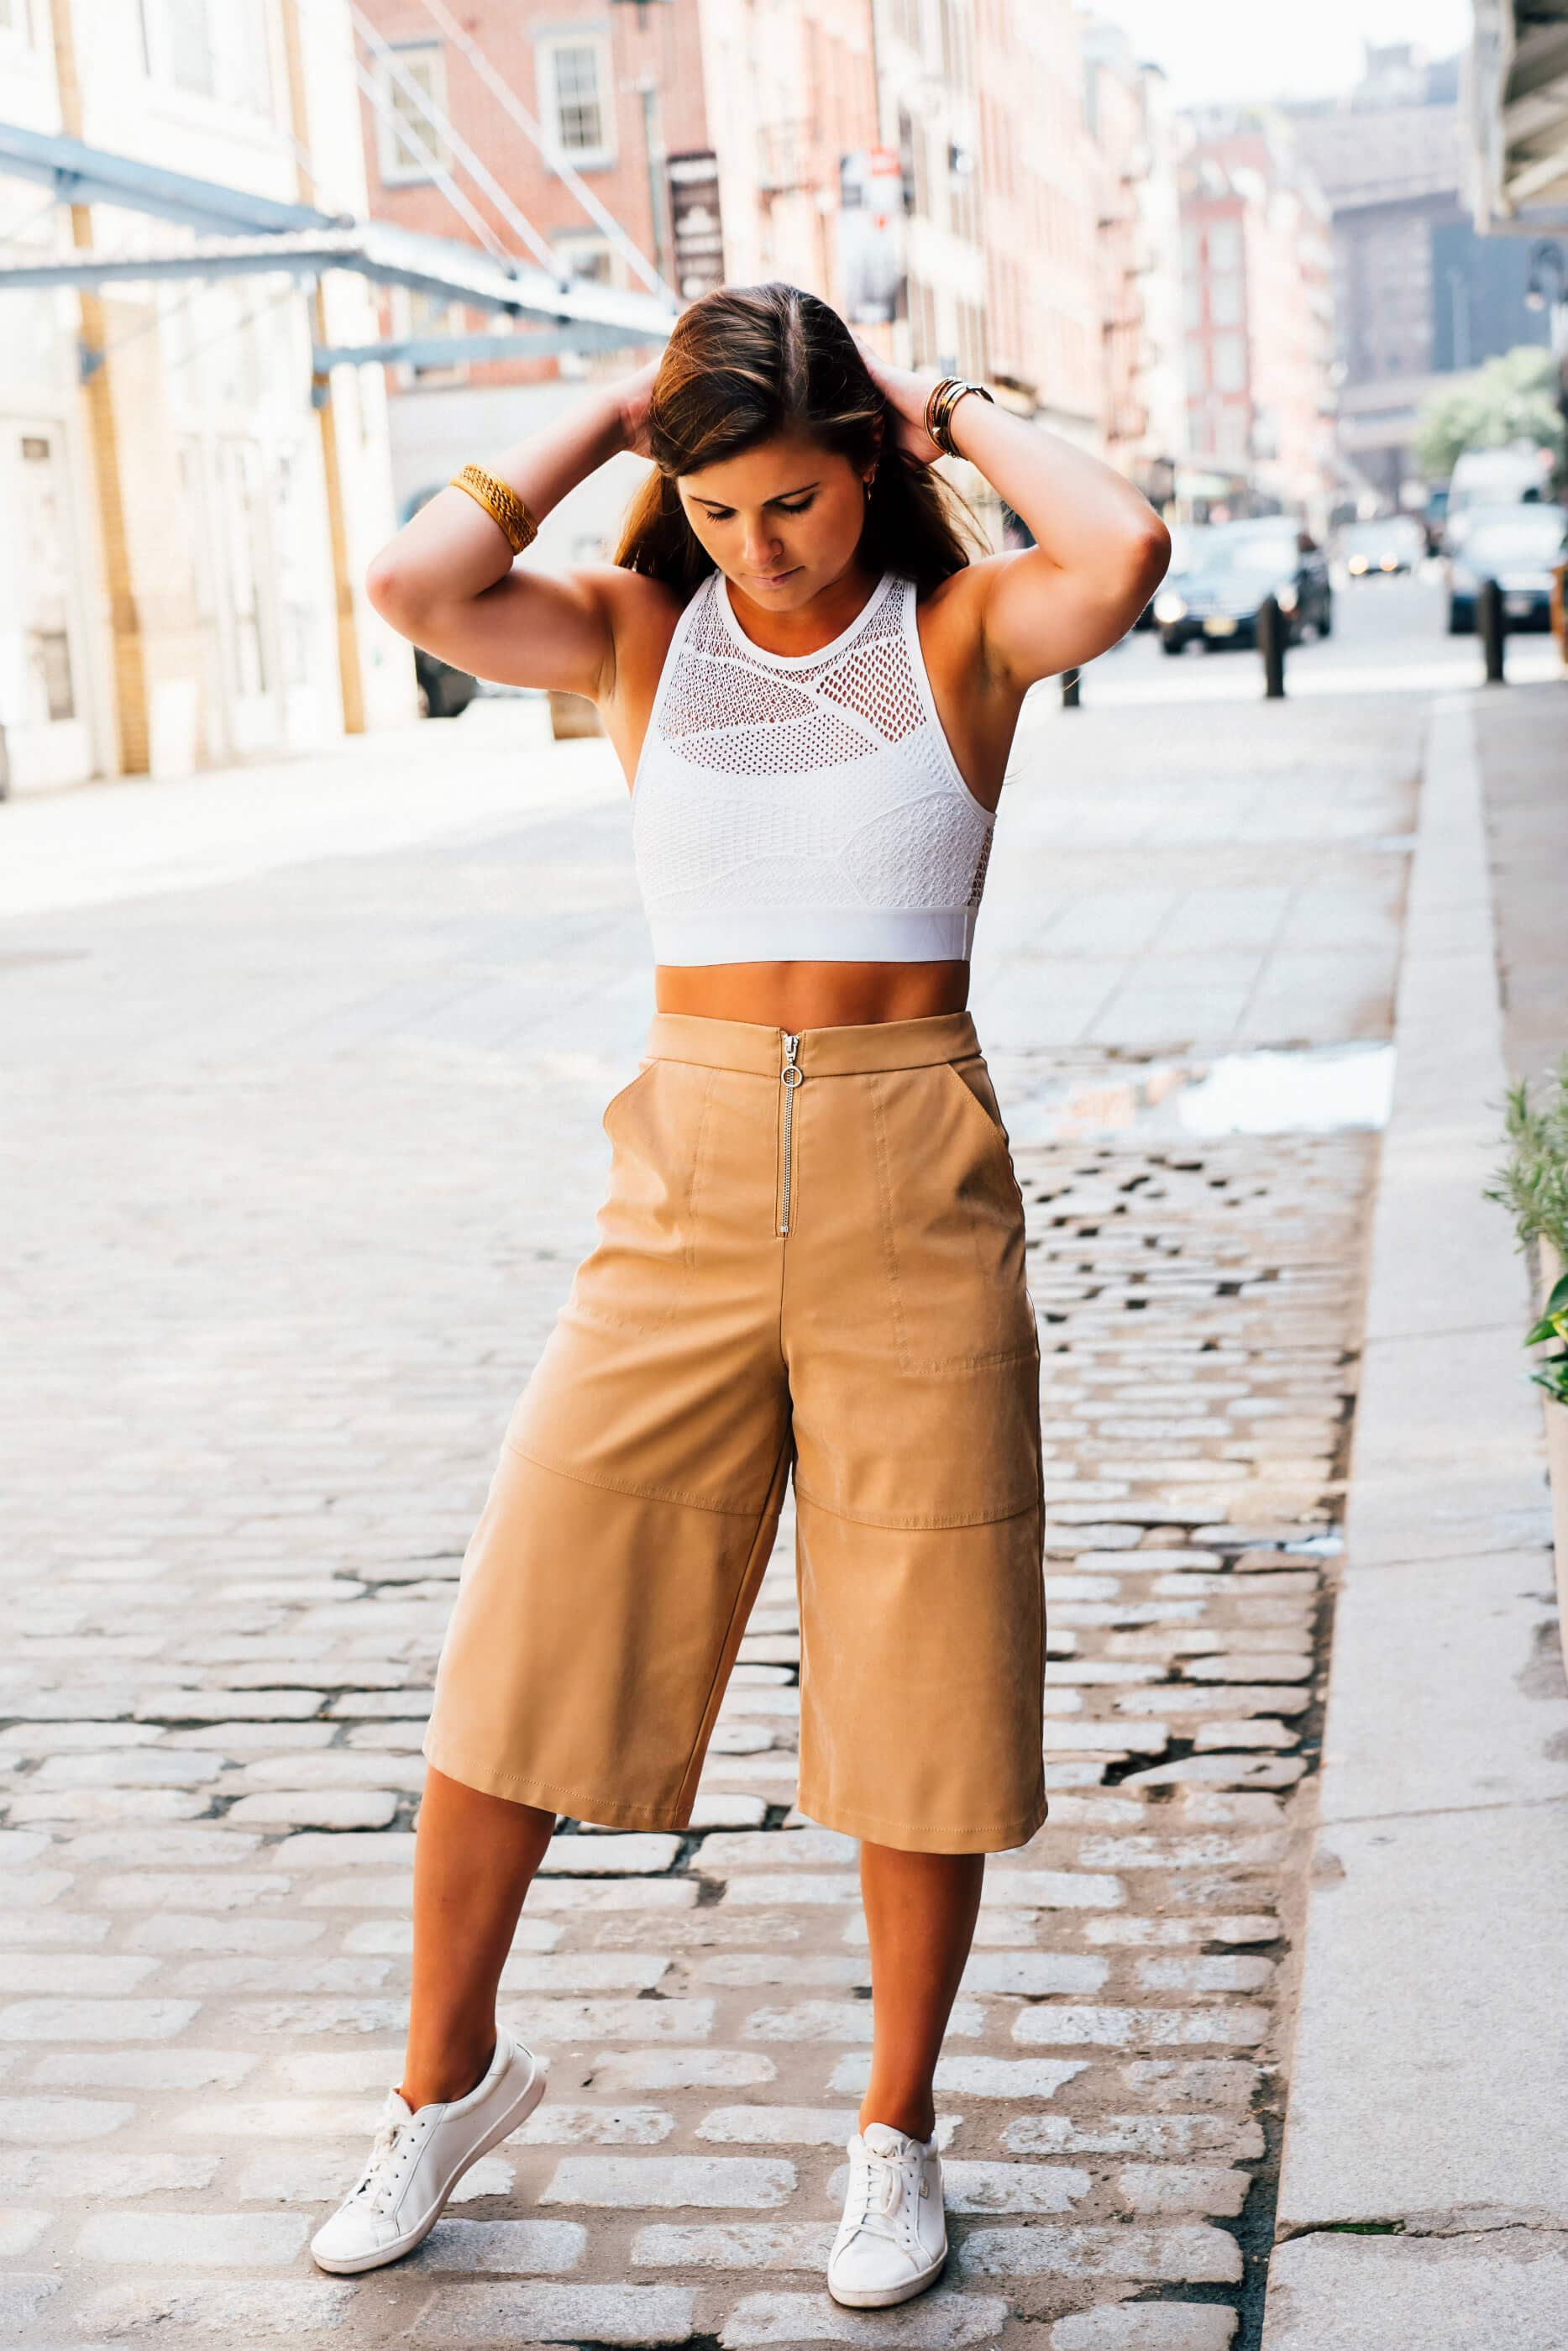 Next Step to Athleisure Outfit, Alala White Lace Cross Back Bra, ASOS tan culottes, Tilden of To Be Bright